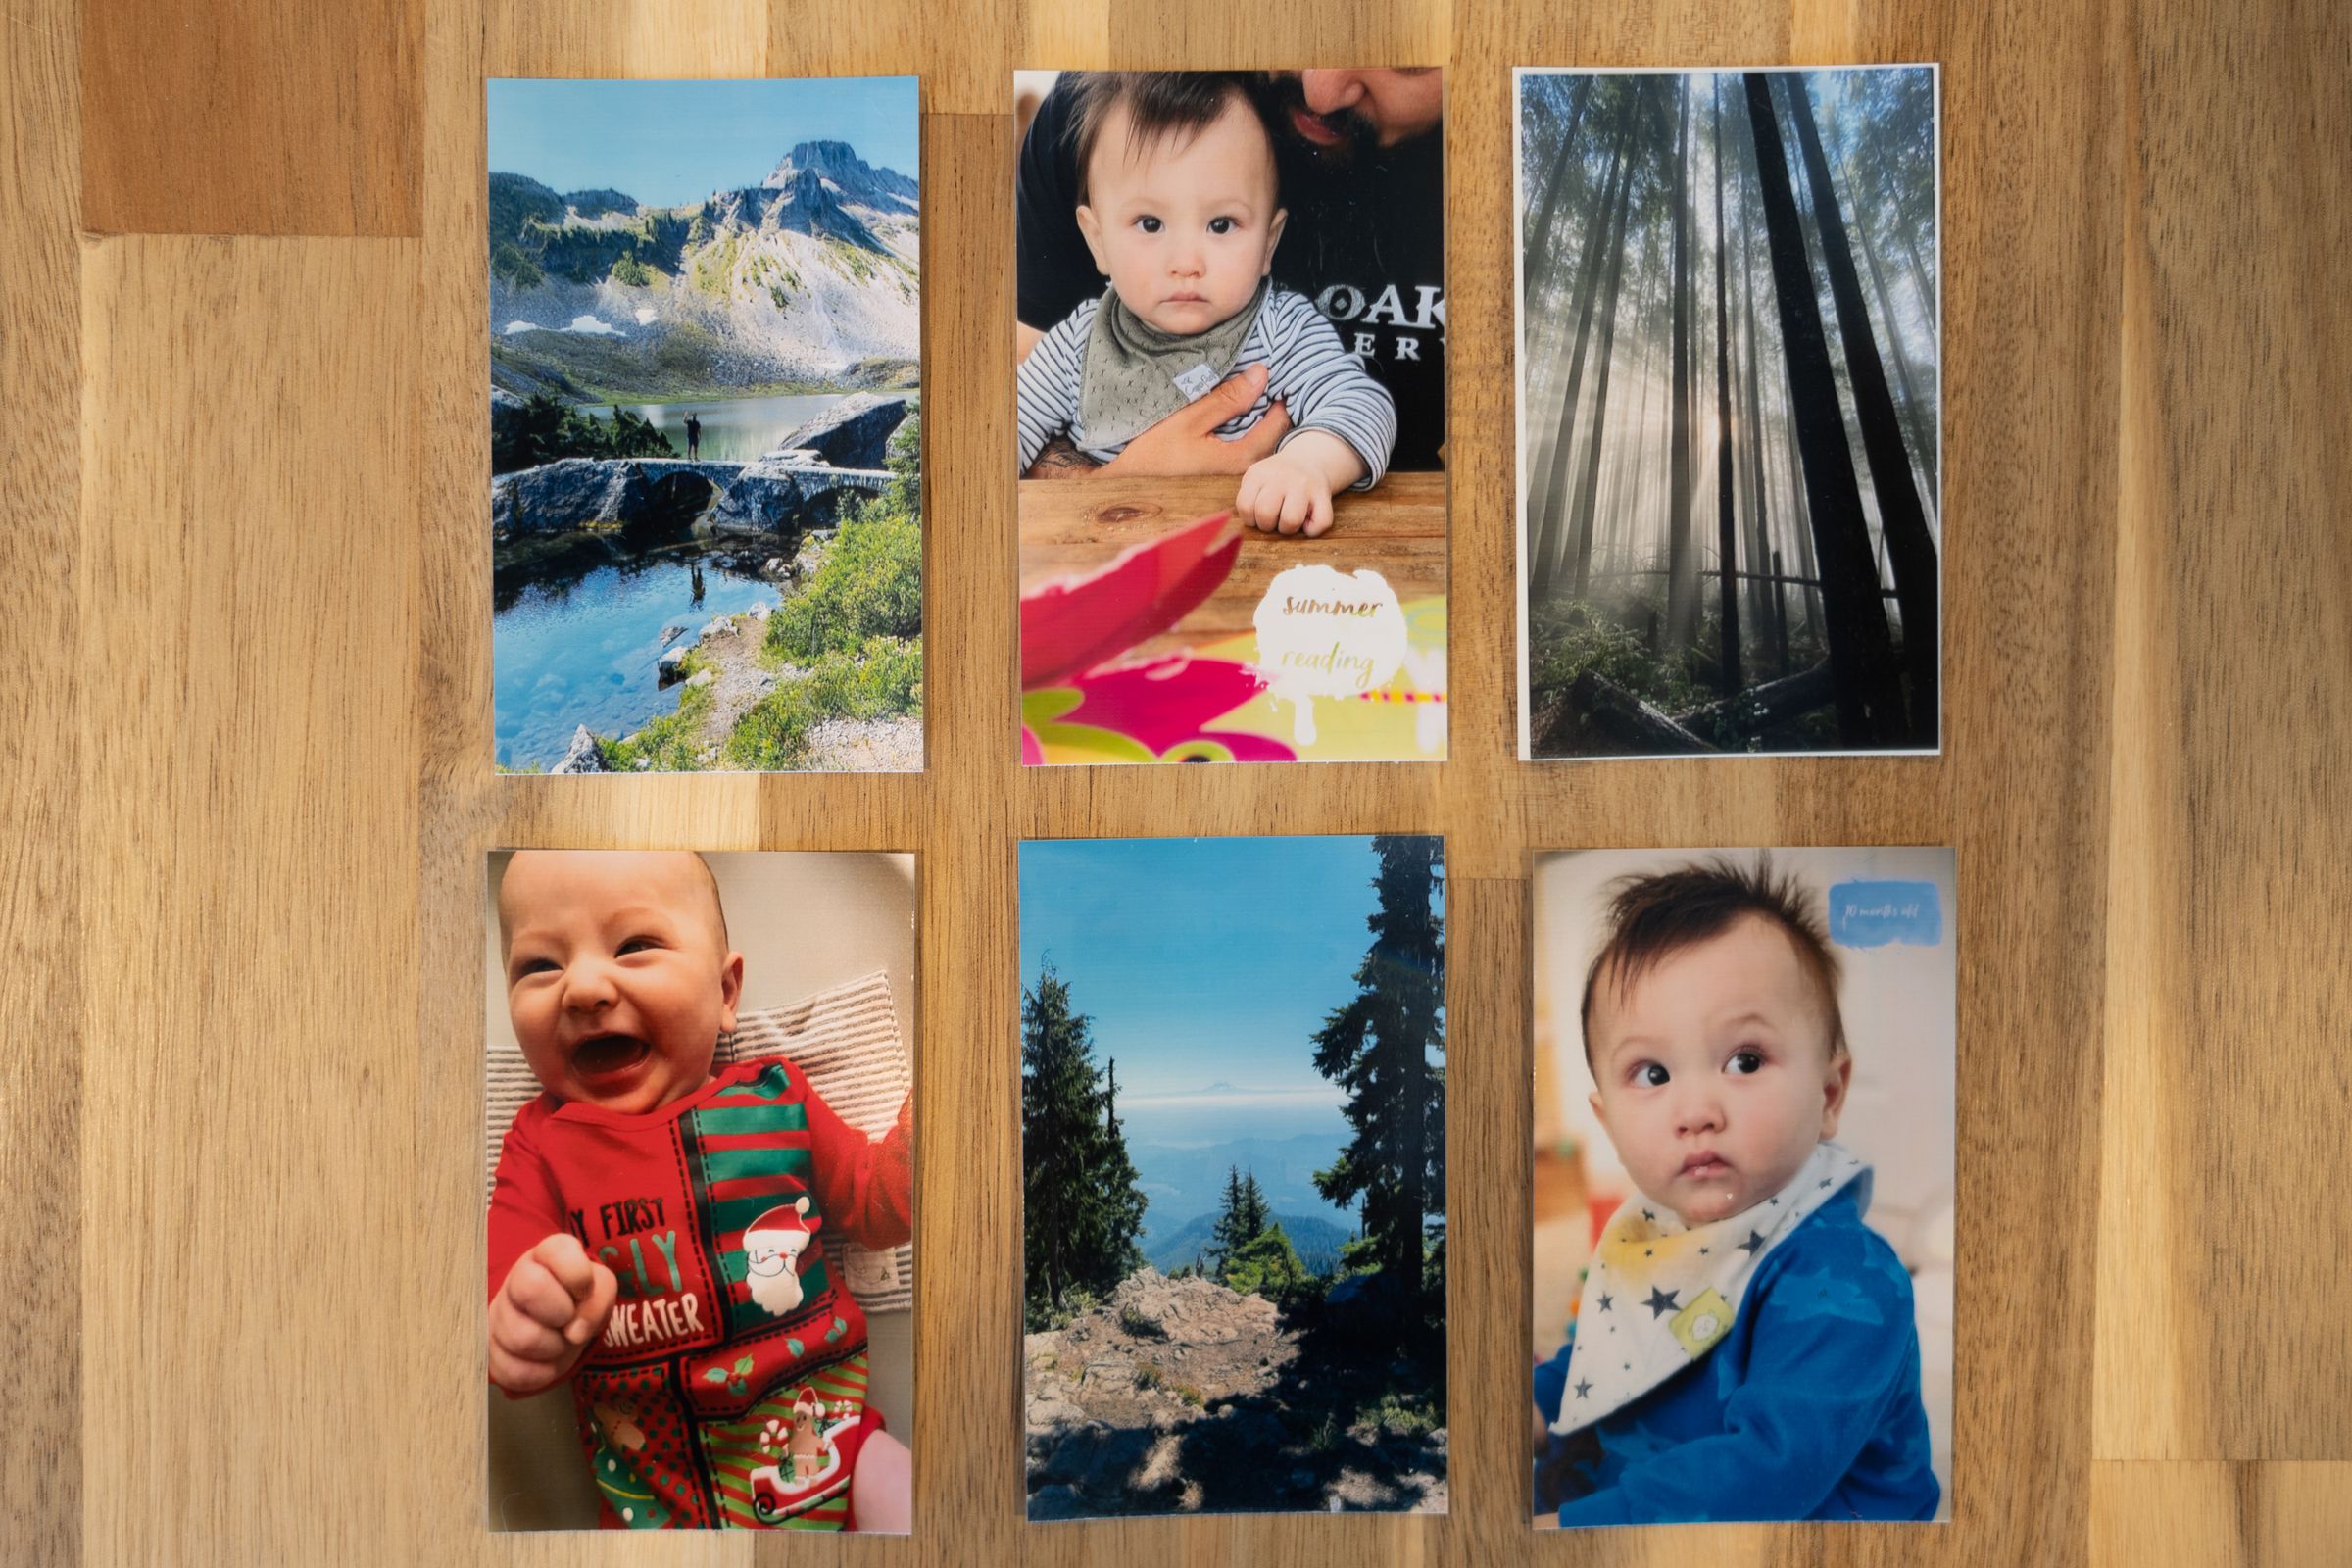 High-quality photos of my colleague’s cute baby and more courtesy of Polaroid’s Hi-Print instant photo printer.